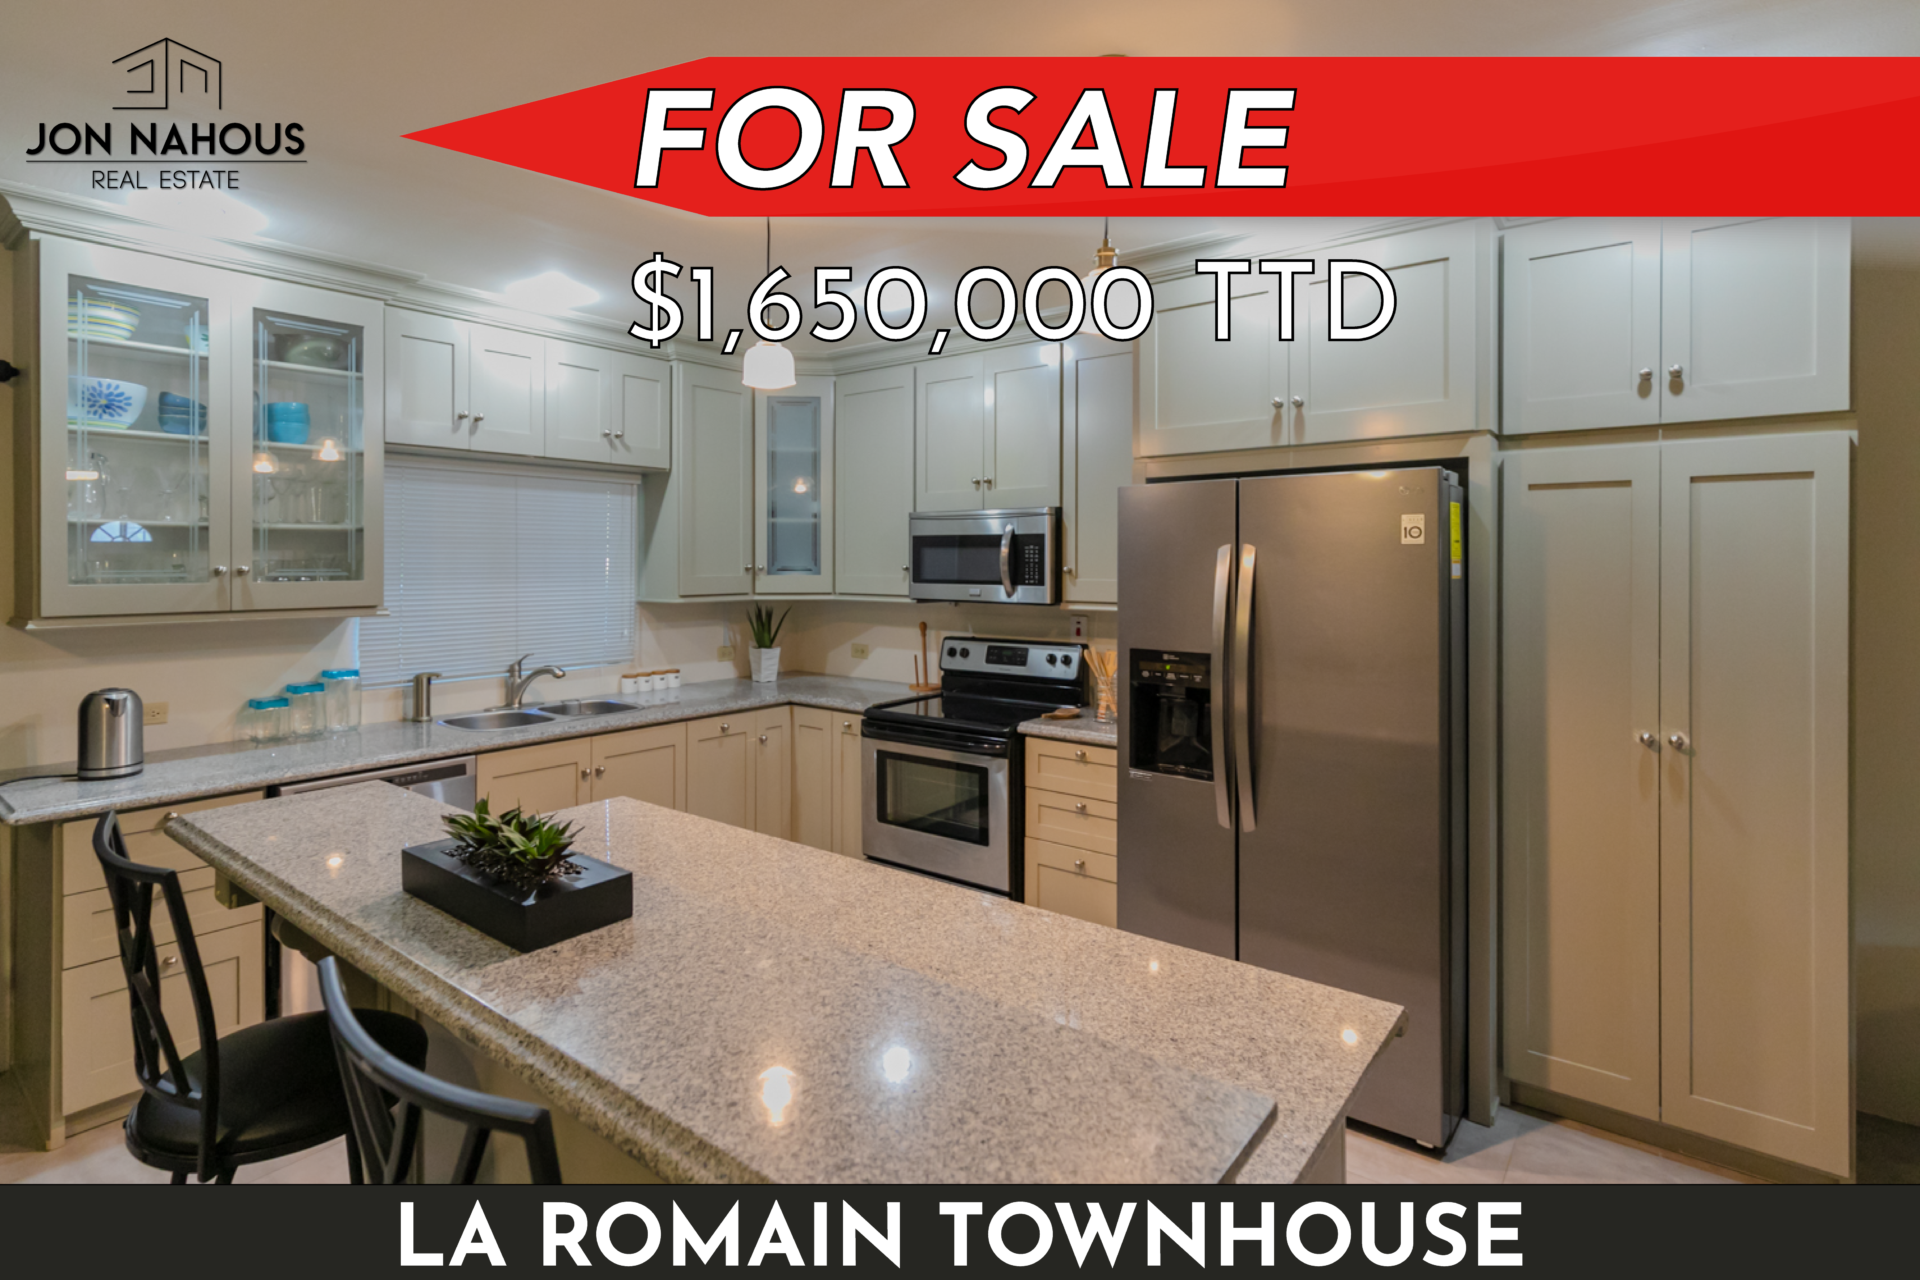 La Romain Townhouse for Sale: 3 Bed, 2.5 Bath, Furnished | My Bunch of Keys